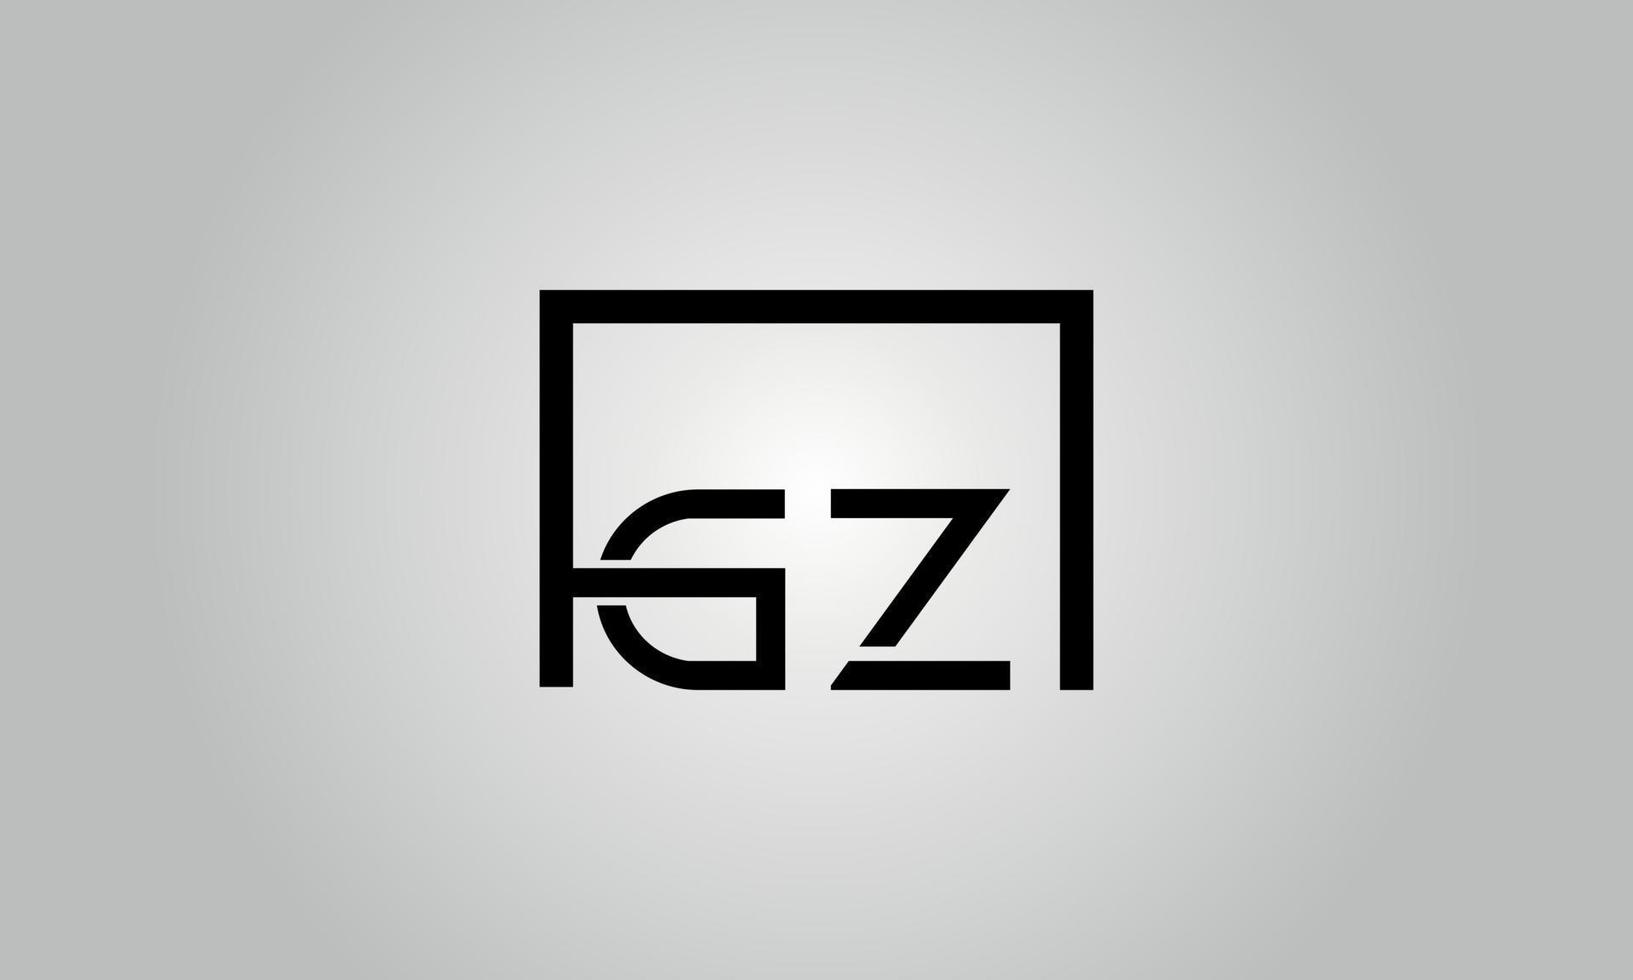 Letter GZ logo design. GZ logo with square shape in black colors vector free vector template.